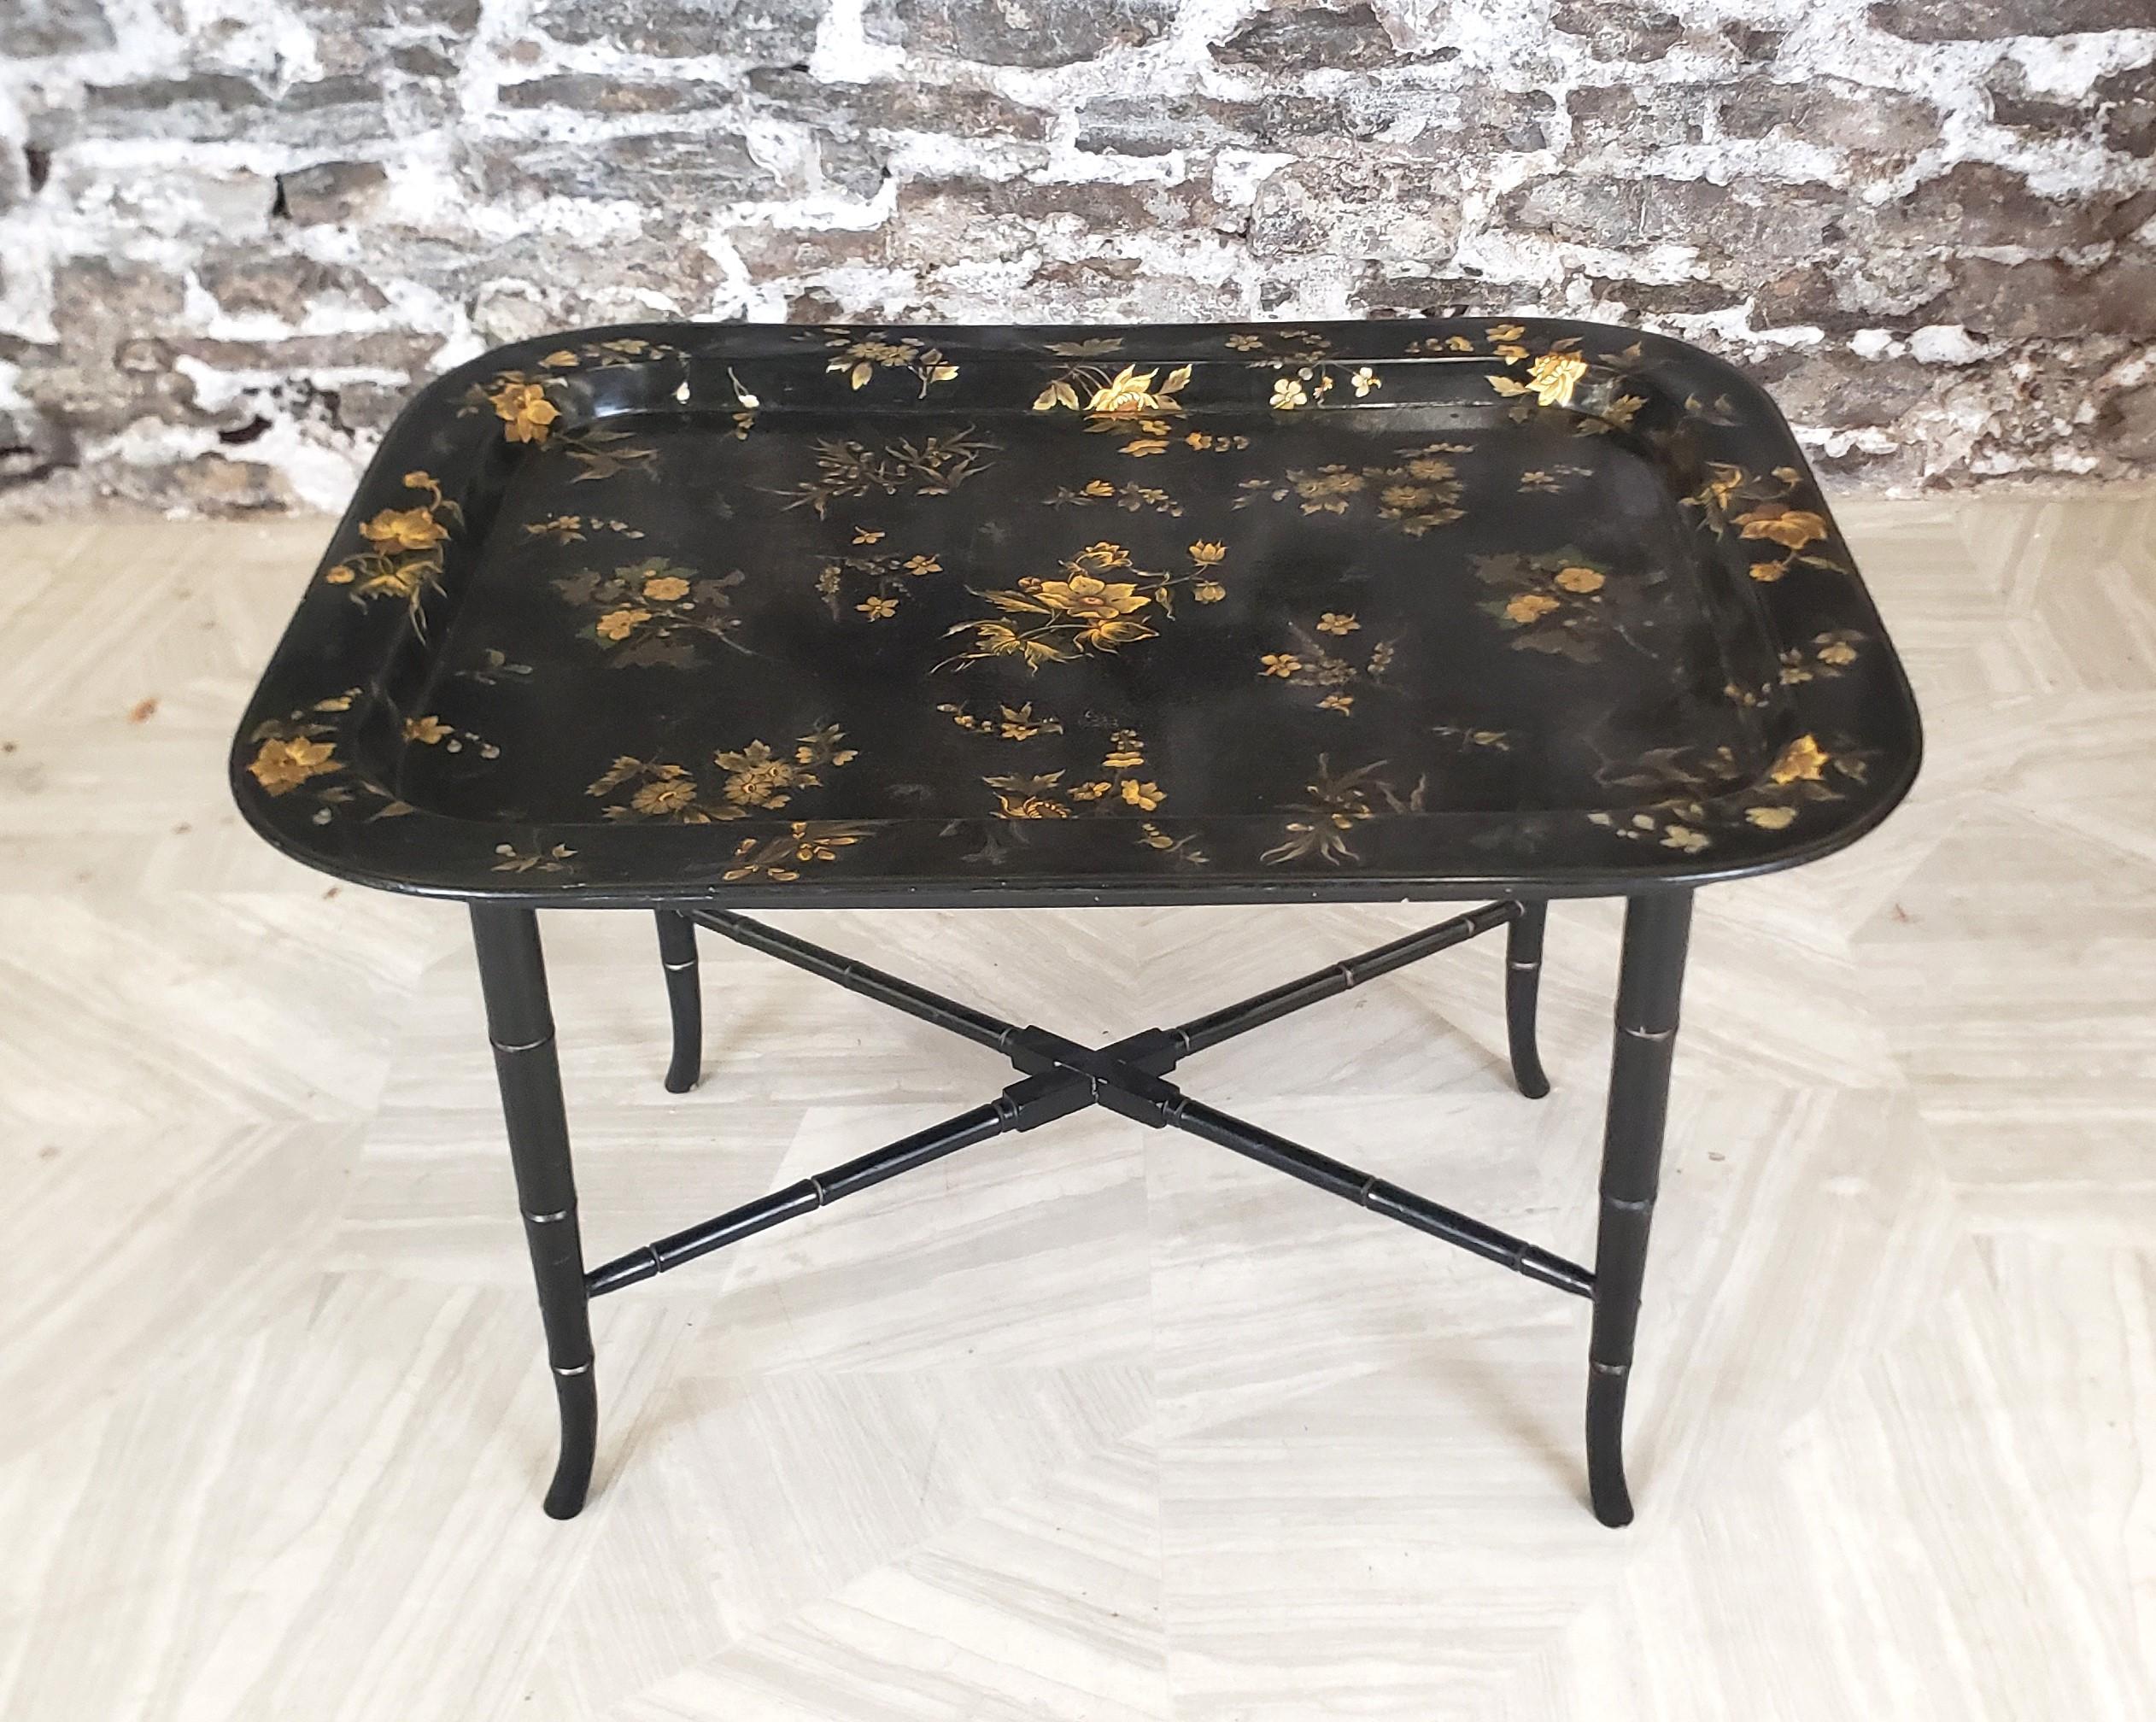 Antique English Paper Mache Tray Table with Faux Bamboo Legs & Floral Decoration In Good Condition For Sale In Hamilton, Ontario